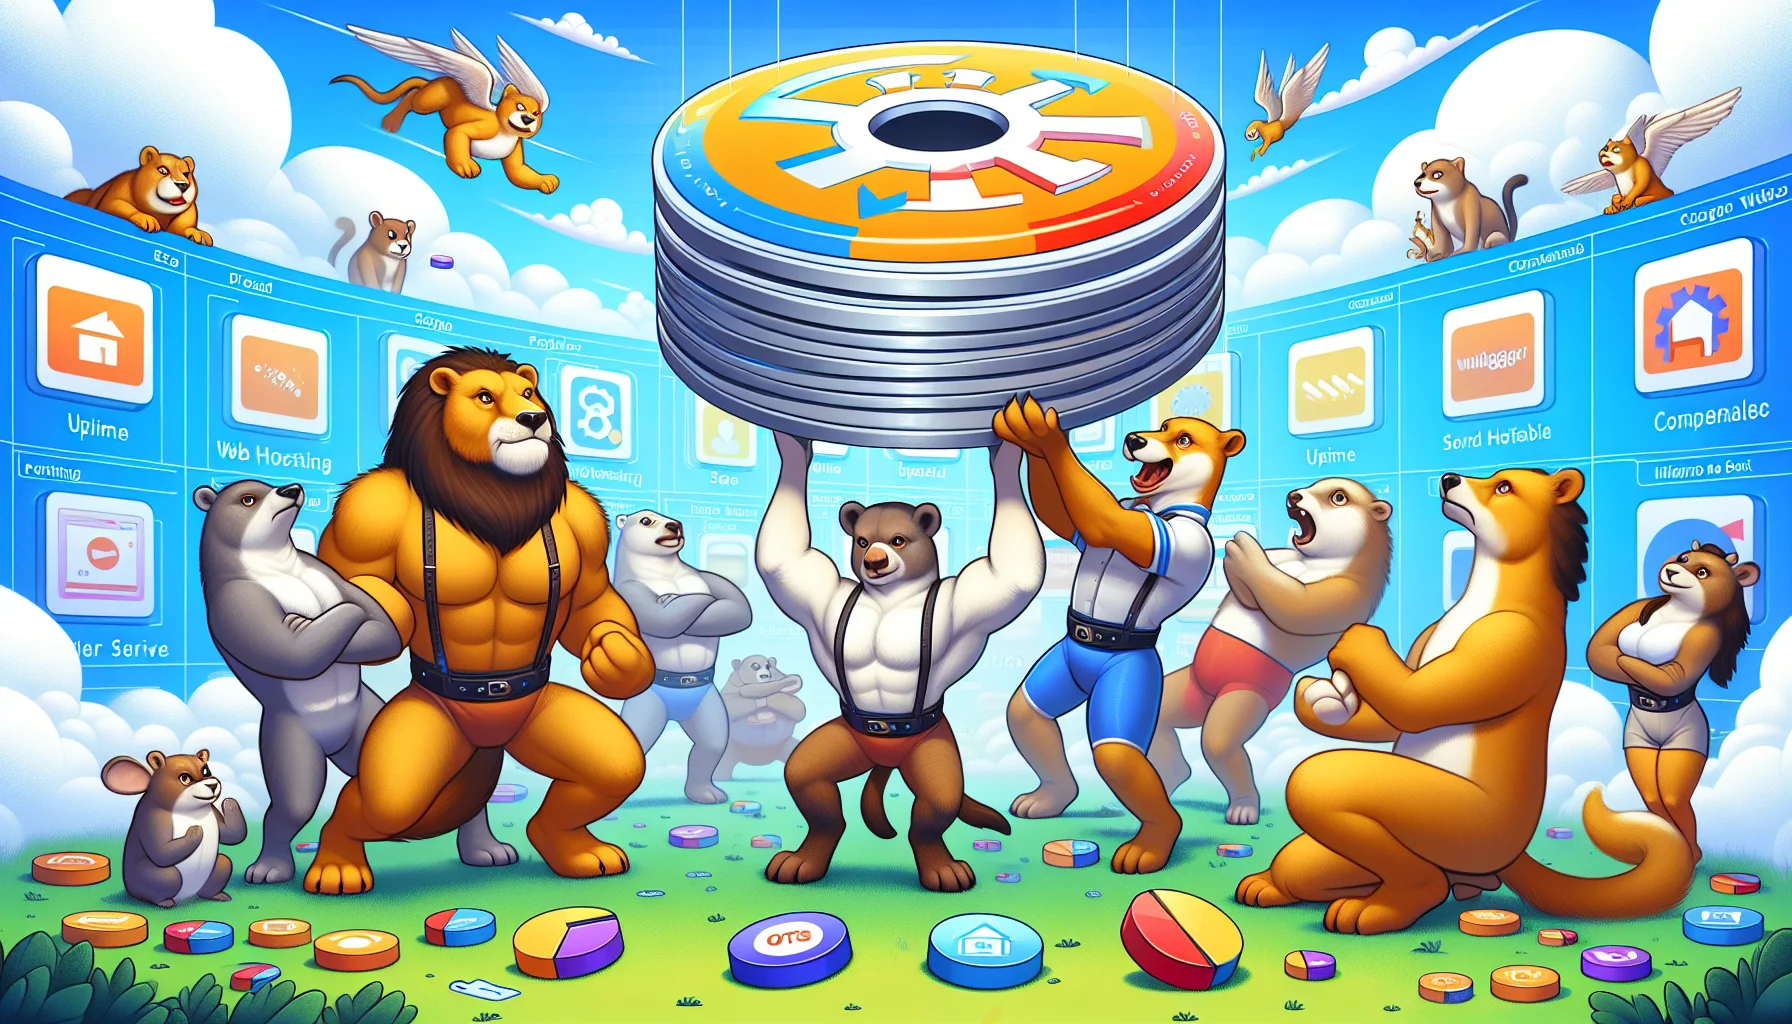 Create a fun and humorous scenario showcasing the competitive landscape in the web hosting market. Picture an allegorical scene in which different animals, representing the hostgator's competitors, are engaging in playful antics. Each animal is showing their prowess by lifting a large disc bearing the symbol of a website, symbolizing their efficient hosting abilities. The scene takes place in a colorful digital landscape filled with icons representing different aspects of web hosting such as uptime, speed, and customer service. All the animals are depicted in a friendly and inviting manner that entices viewers to learn more about web hosting.